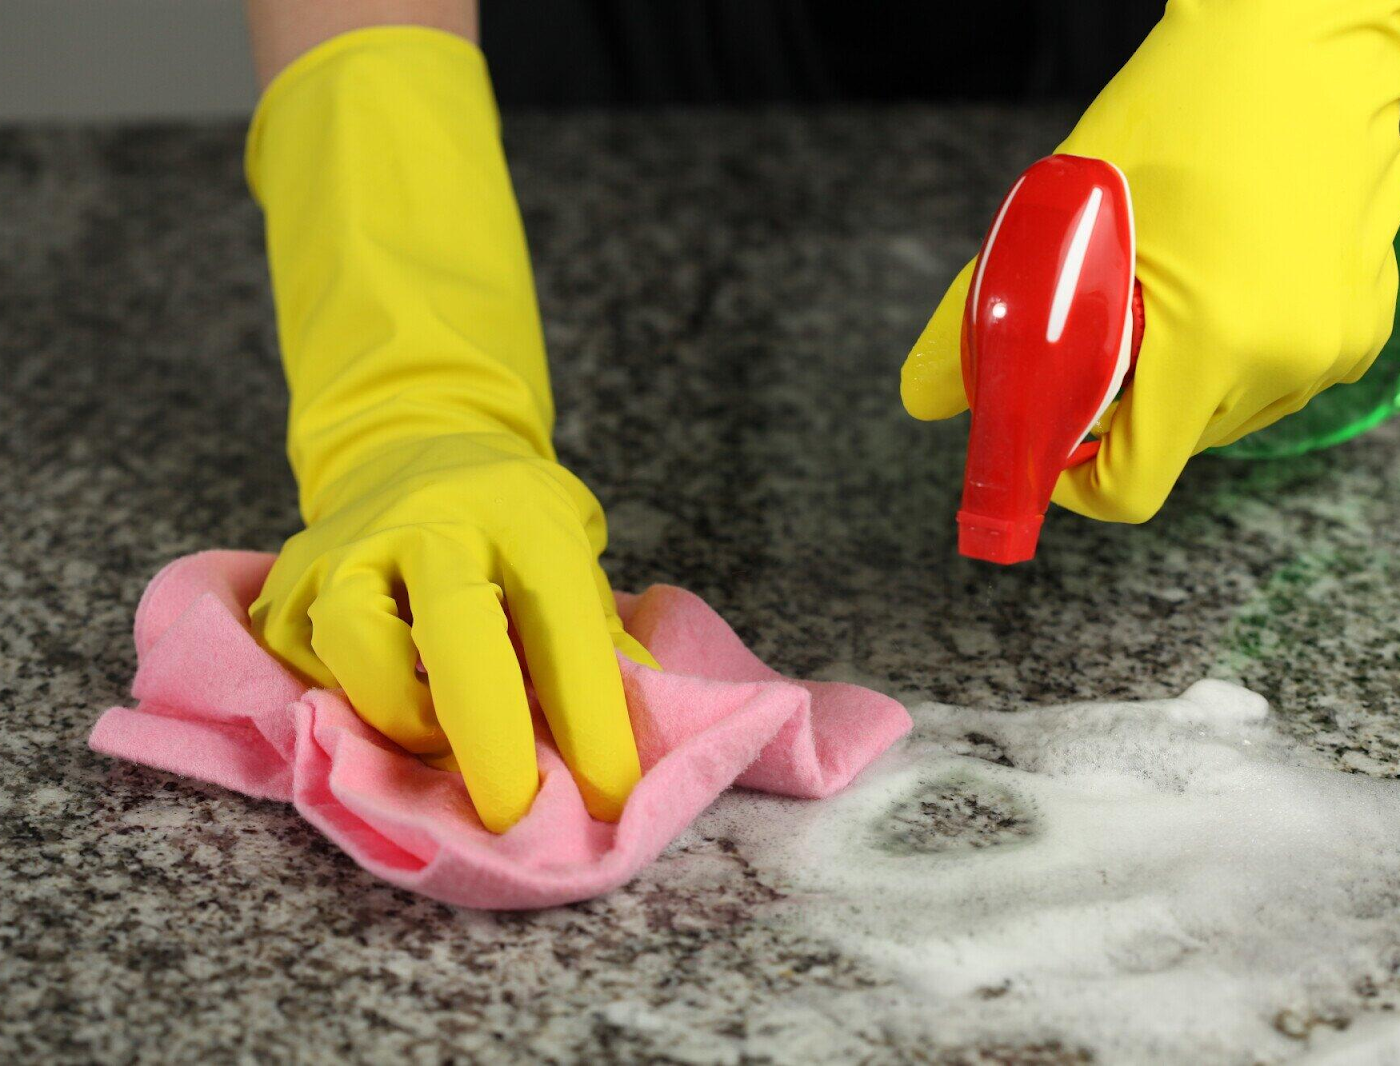 Why Investing in Specialty Cleaning Services Can Save You Money in the Long Run